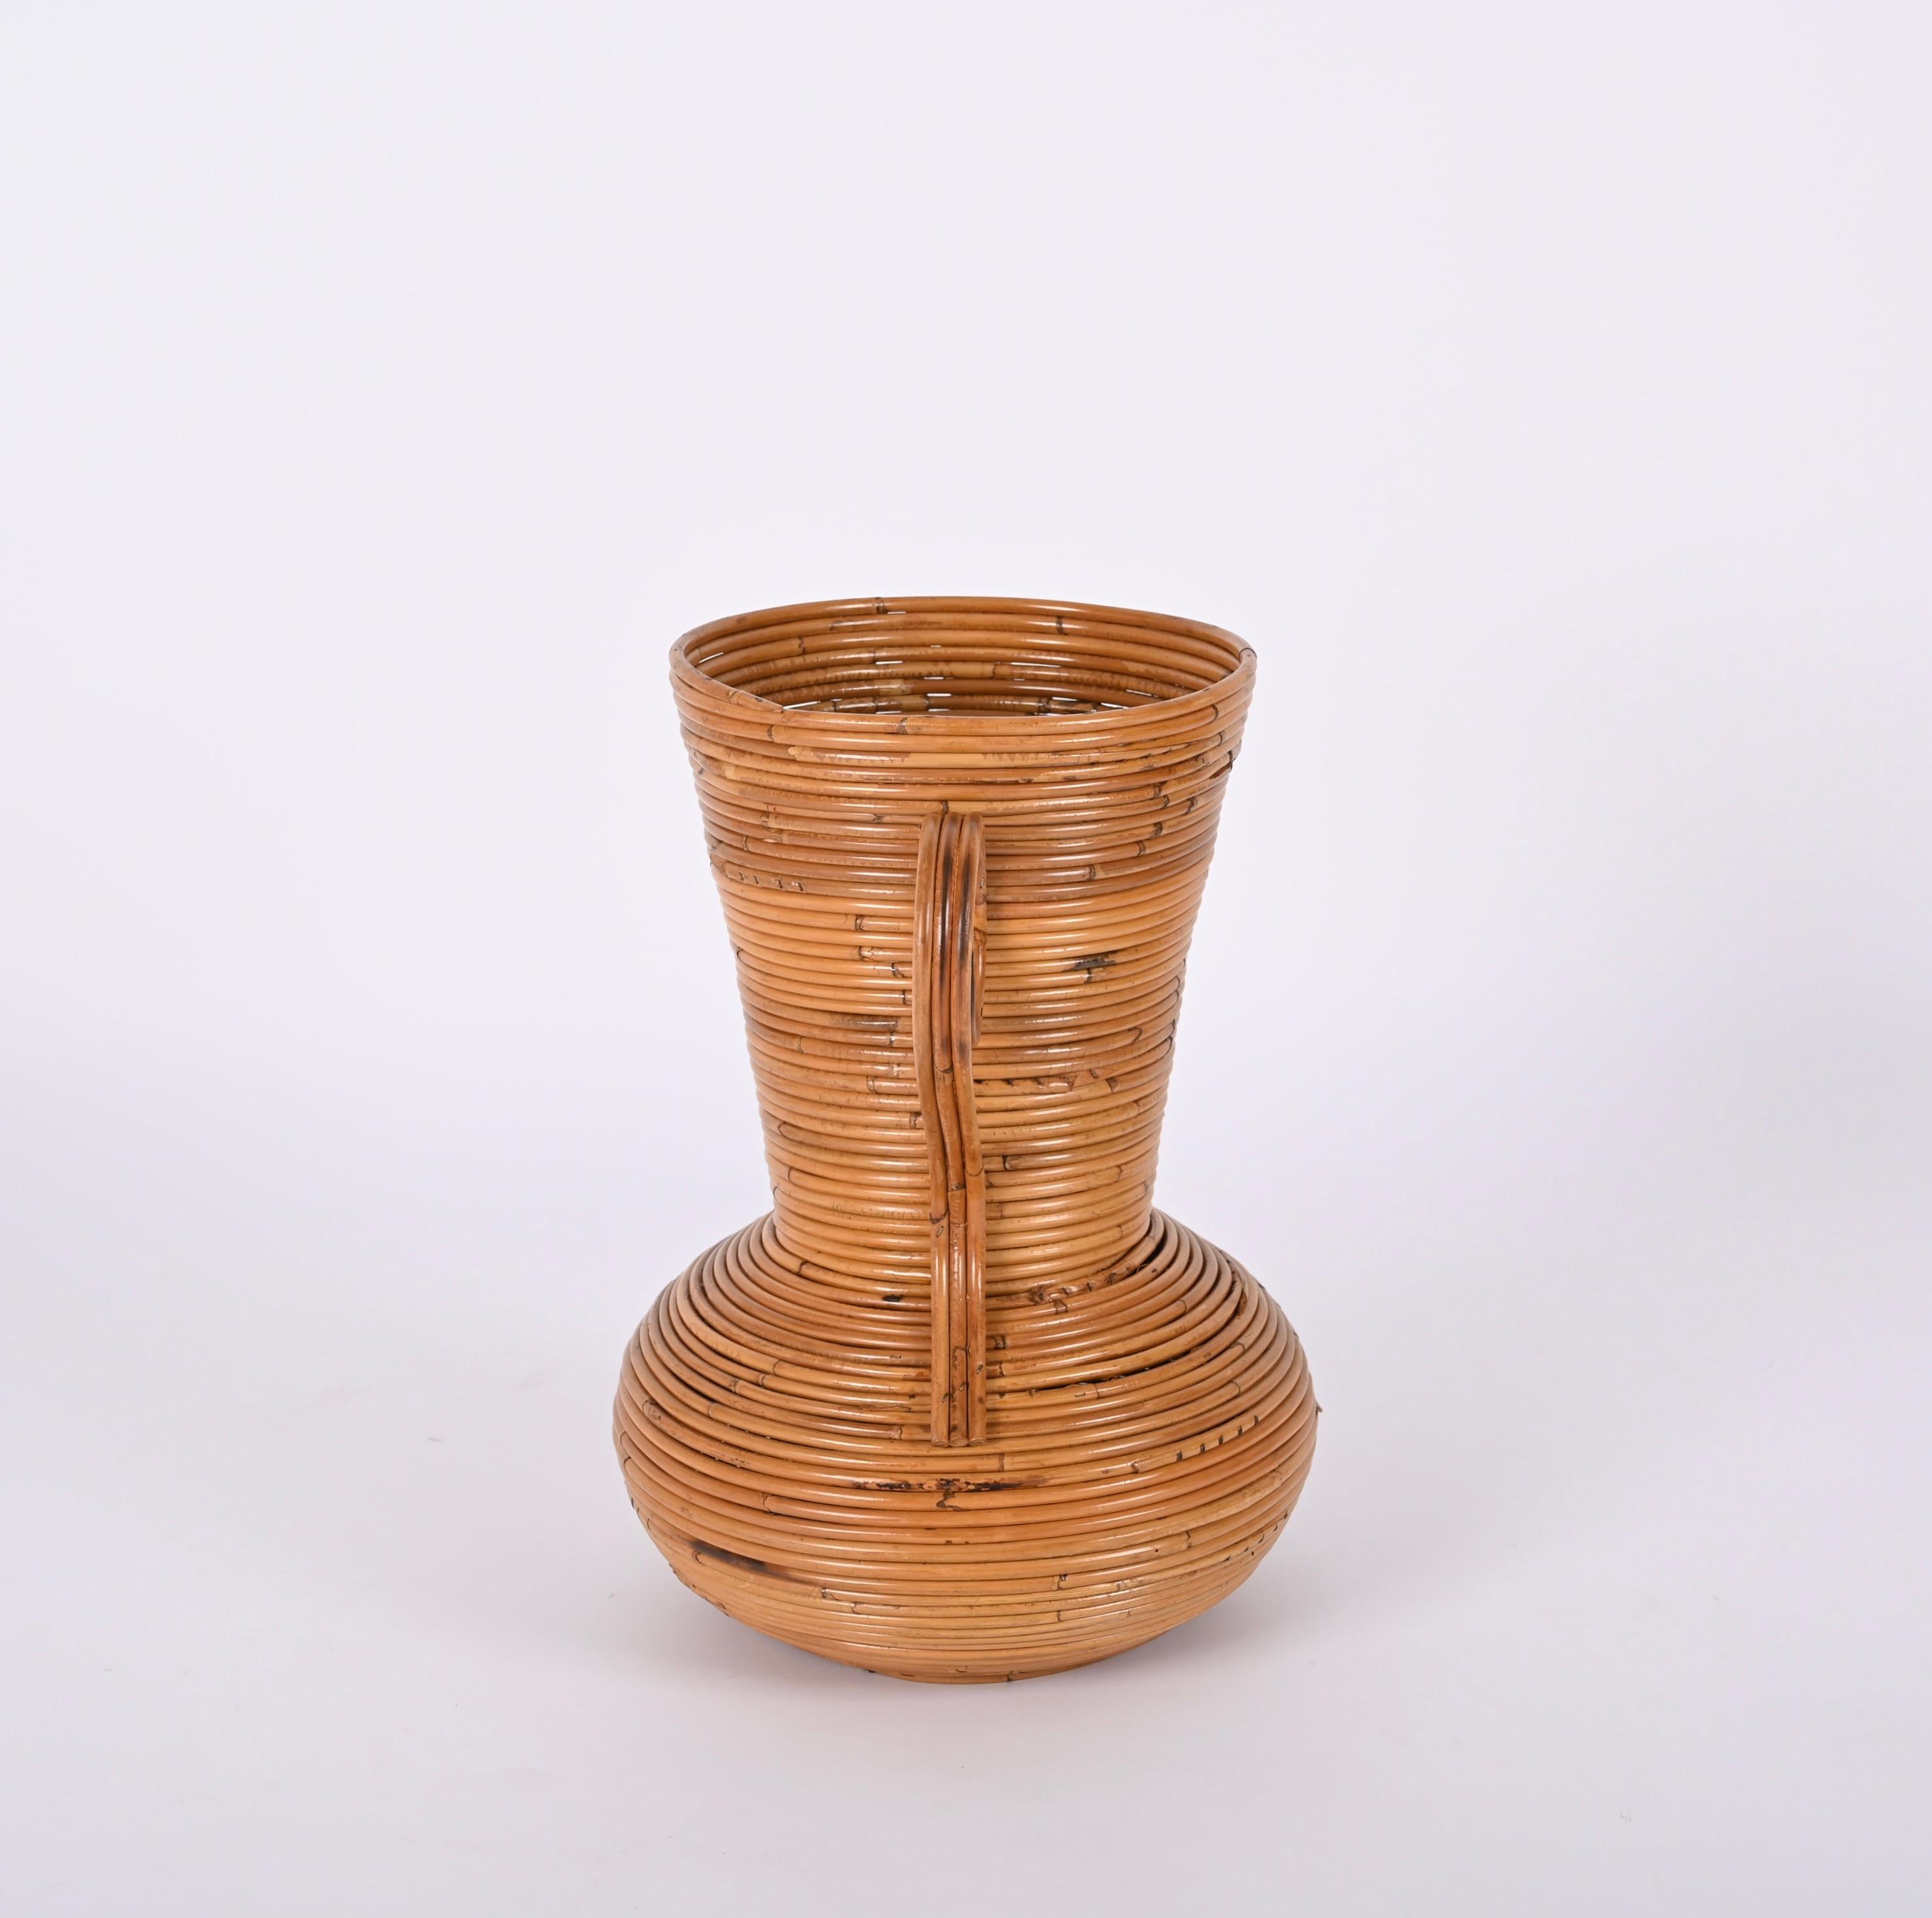 Midcentury Bamboo and Rattan Decorative Vase, by Vivai del Sud, Italy, 1970s For Sale 3